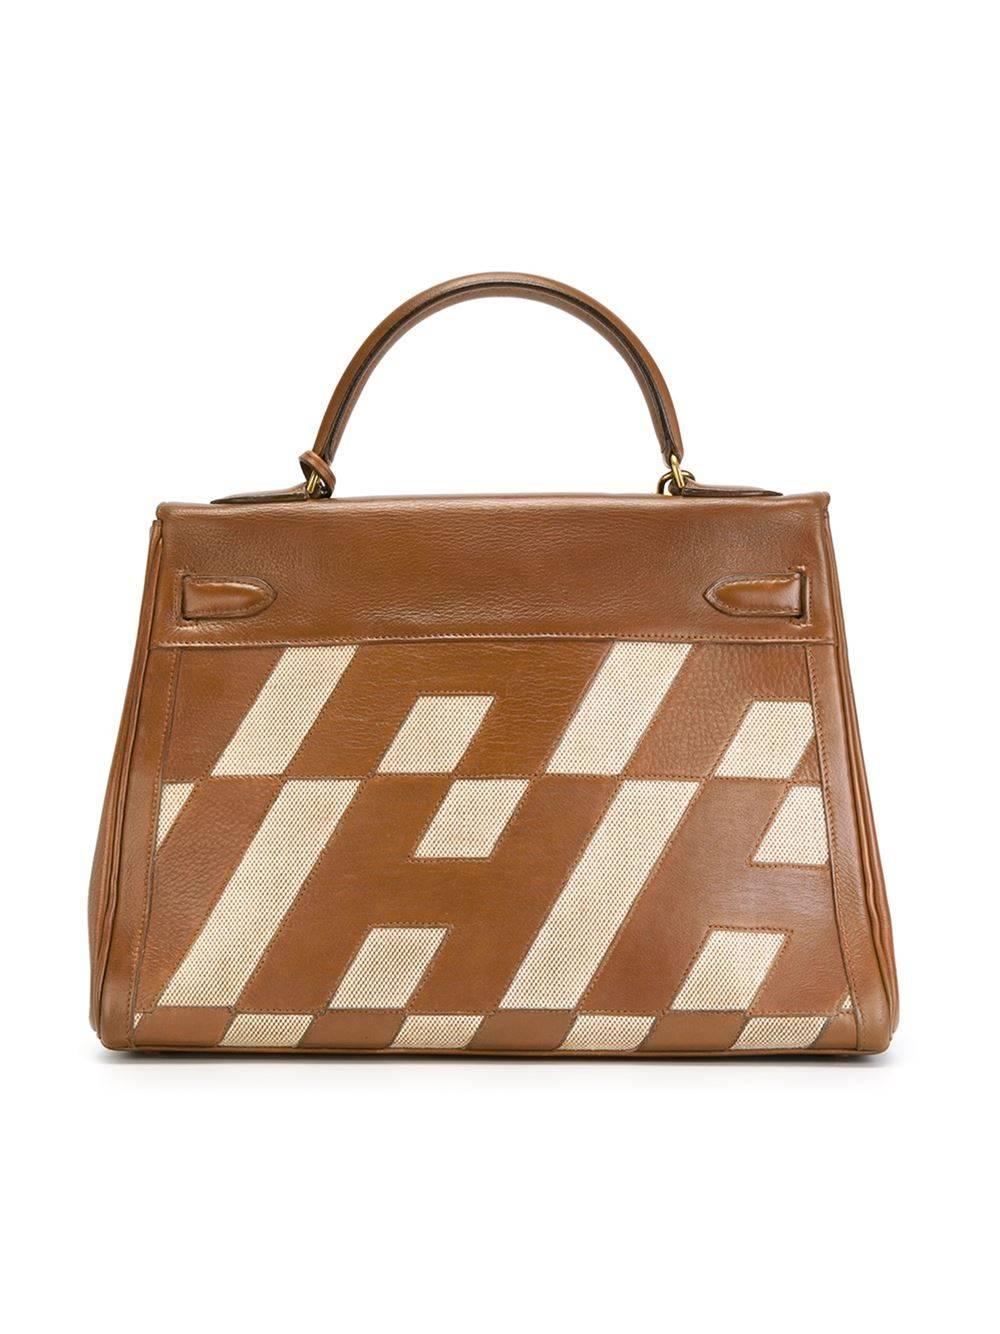 Fabulous Hermès Kelly Handbag, a real collector piece, the Kelly from the Ulysse Collection, year 1970. Cognac brown leather and beige canvas, H pattern. Gold hardware finishing. Excellent vintage condition. Size: 32 cm. 
Just unique, just for